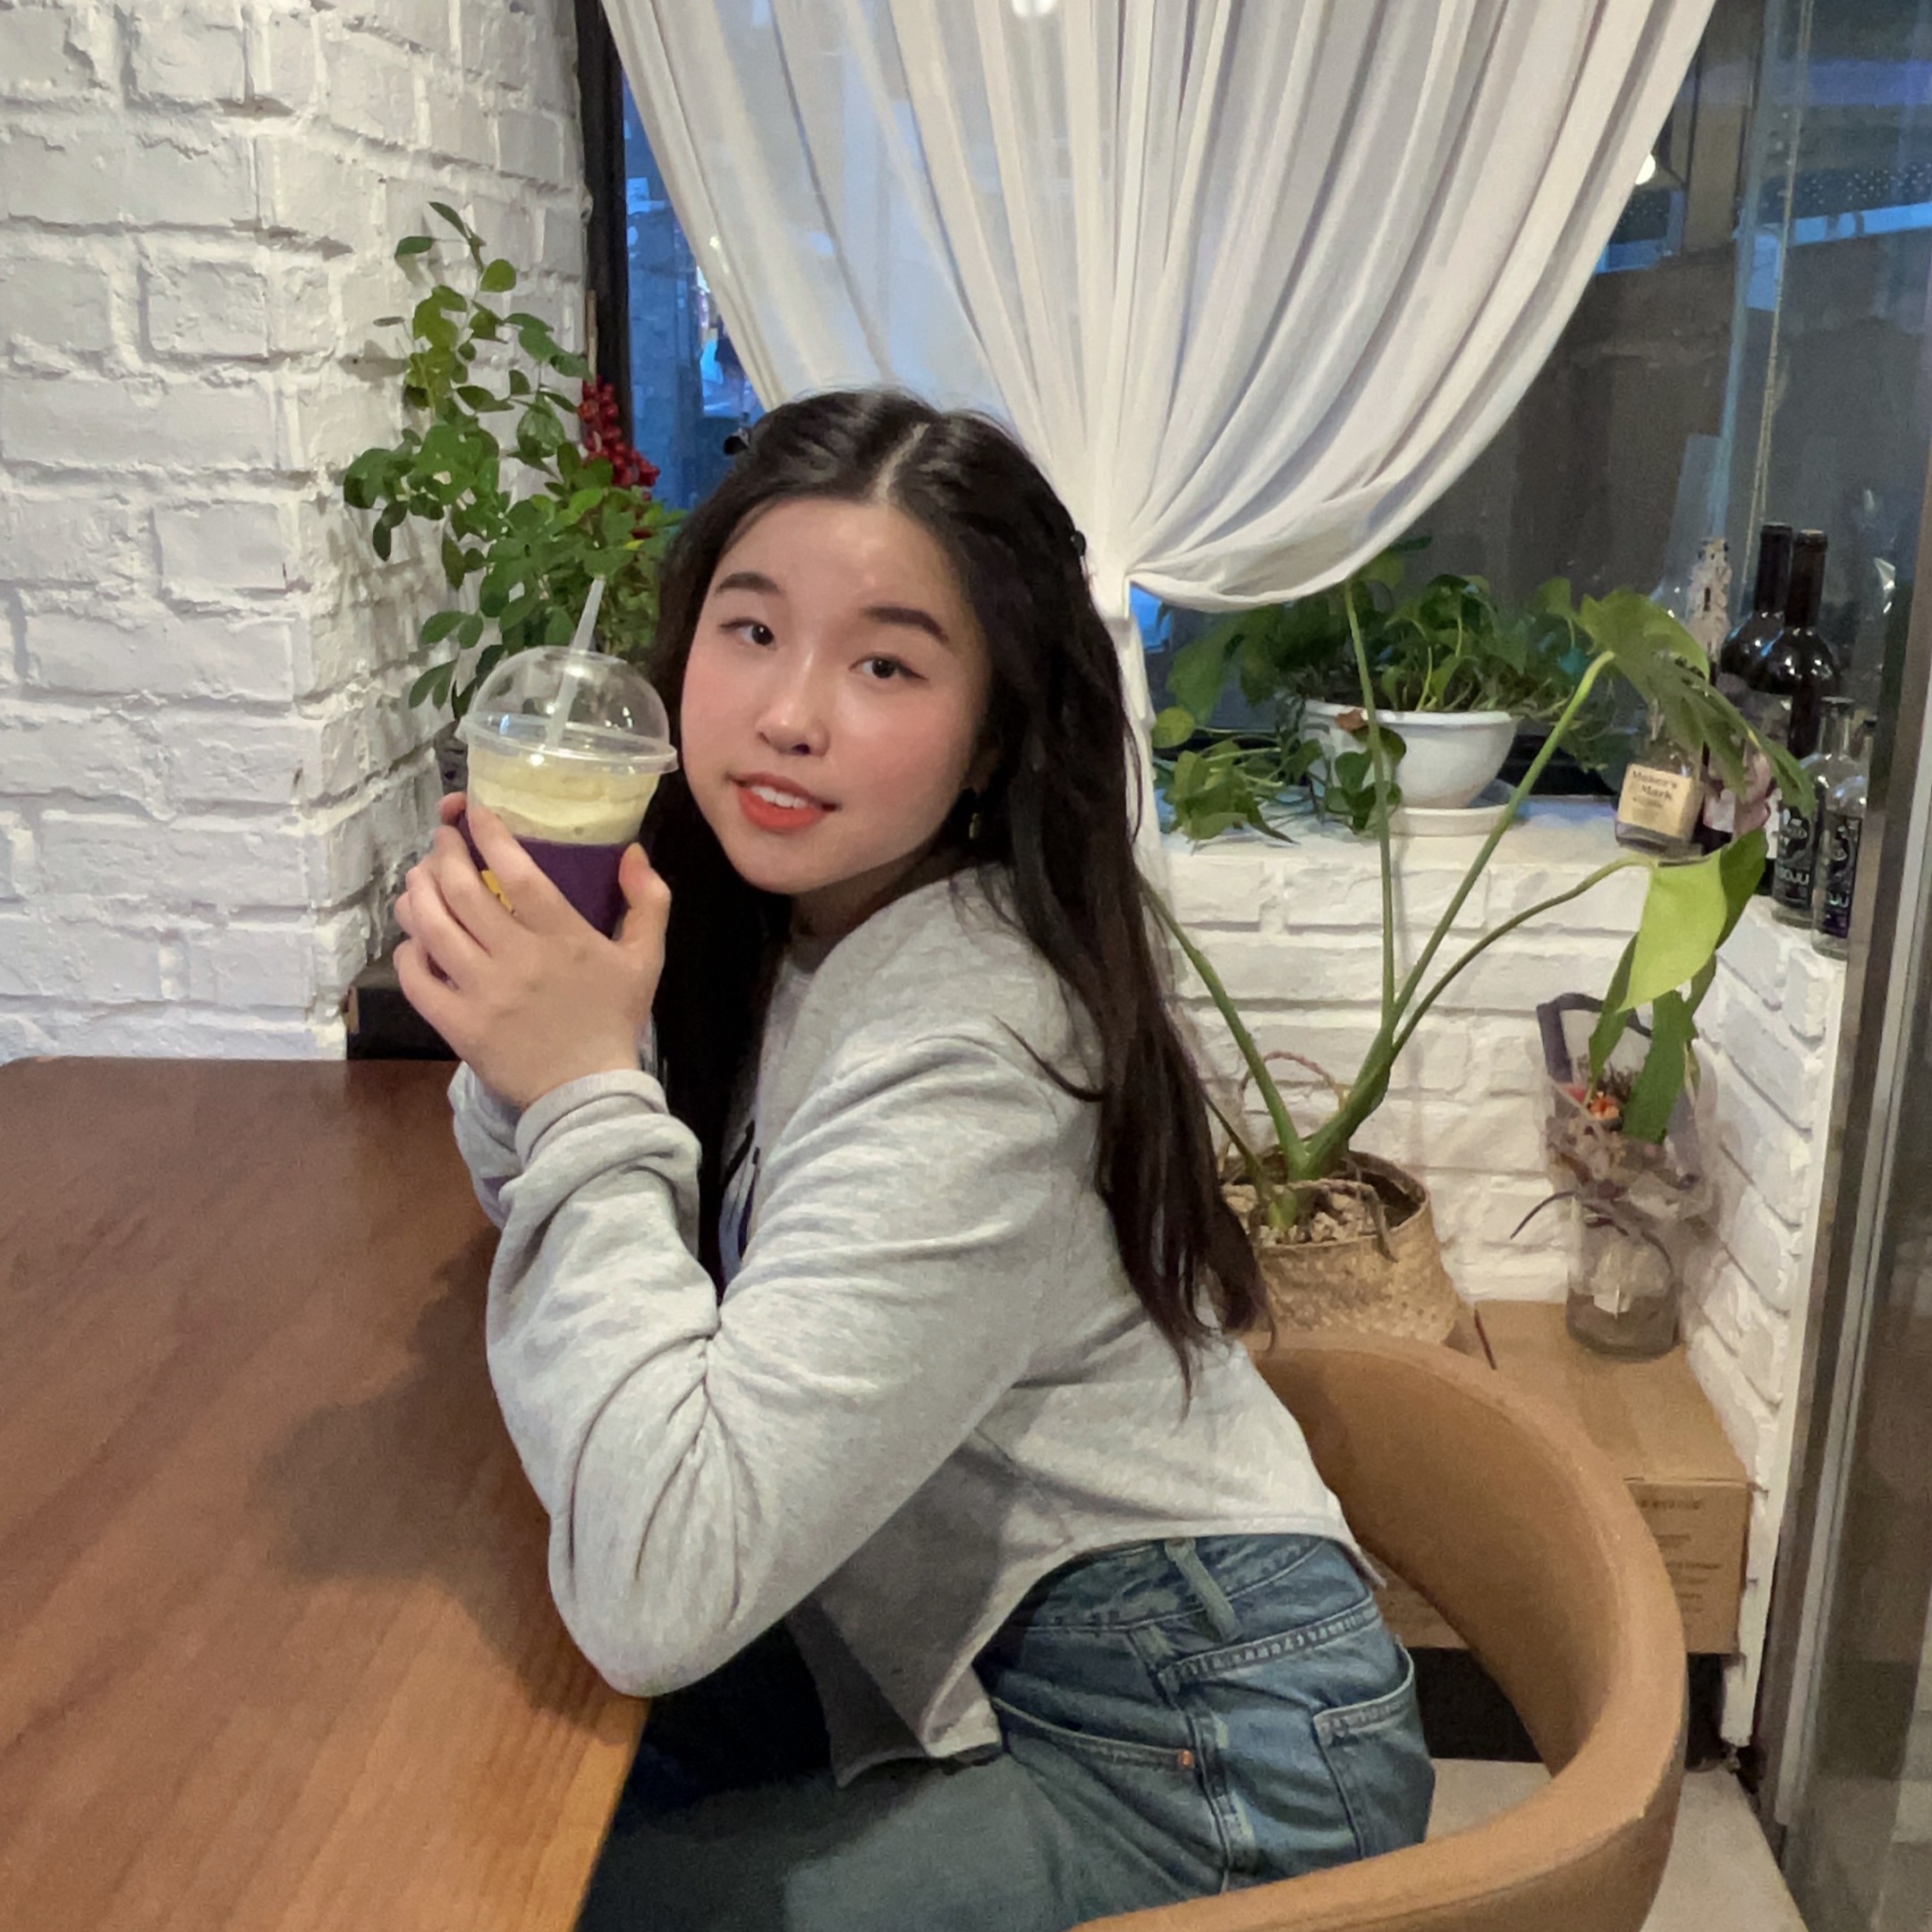 Miya Liu is a sophomore planning to major in Computer Science and Philosophy. She joined ESWNU to explore the power of engineering in solving modern sustainability issues. As a member of the AutoAquaponics software team, she is eager to learn and develop her skills in web app development and system GUI and of course, to hang out with the fish.LINKEDINLINKhttps://www.linkedin.com/in/miya-liu-0627/